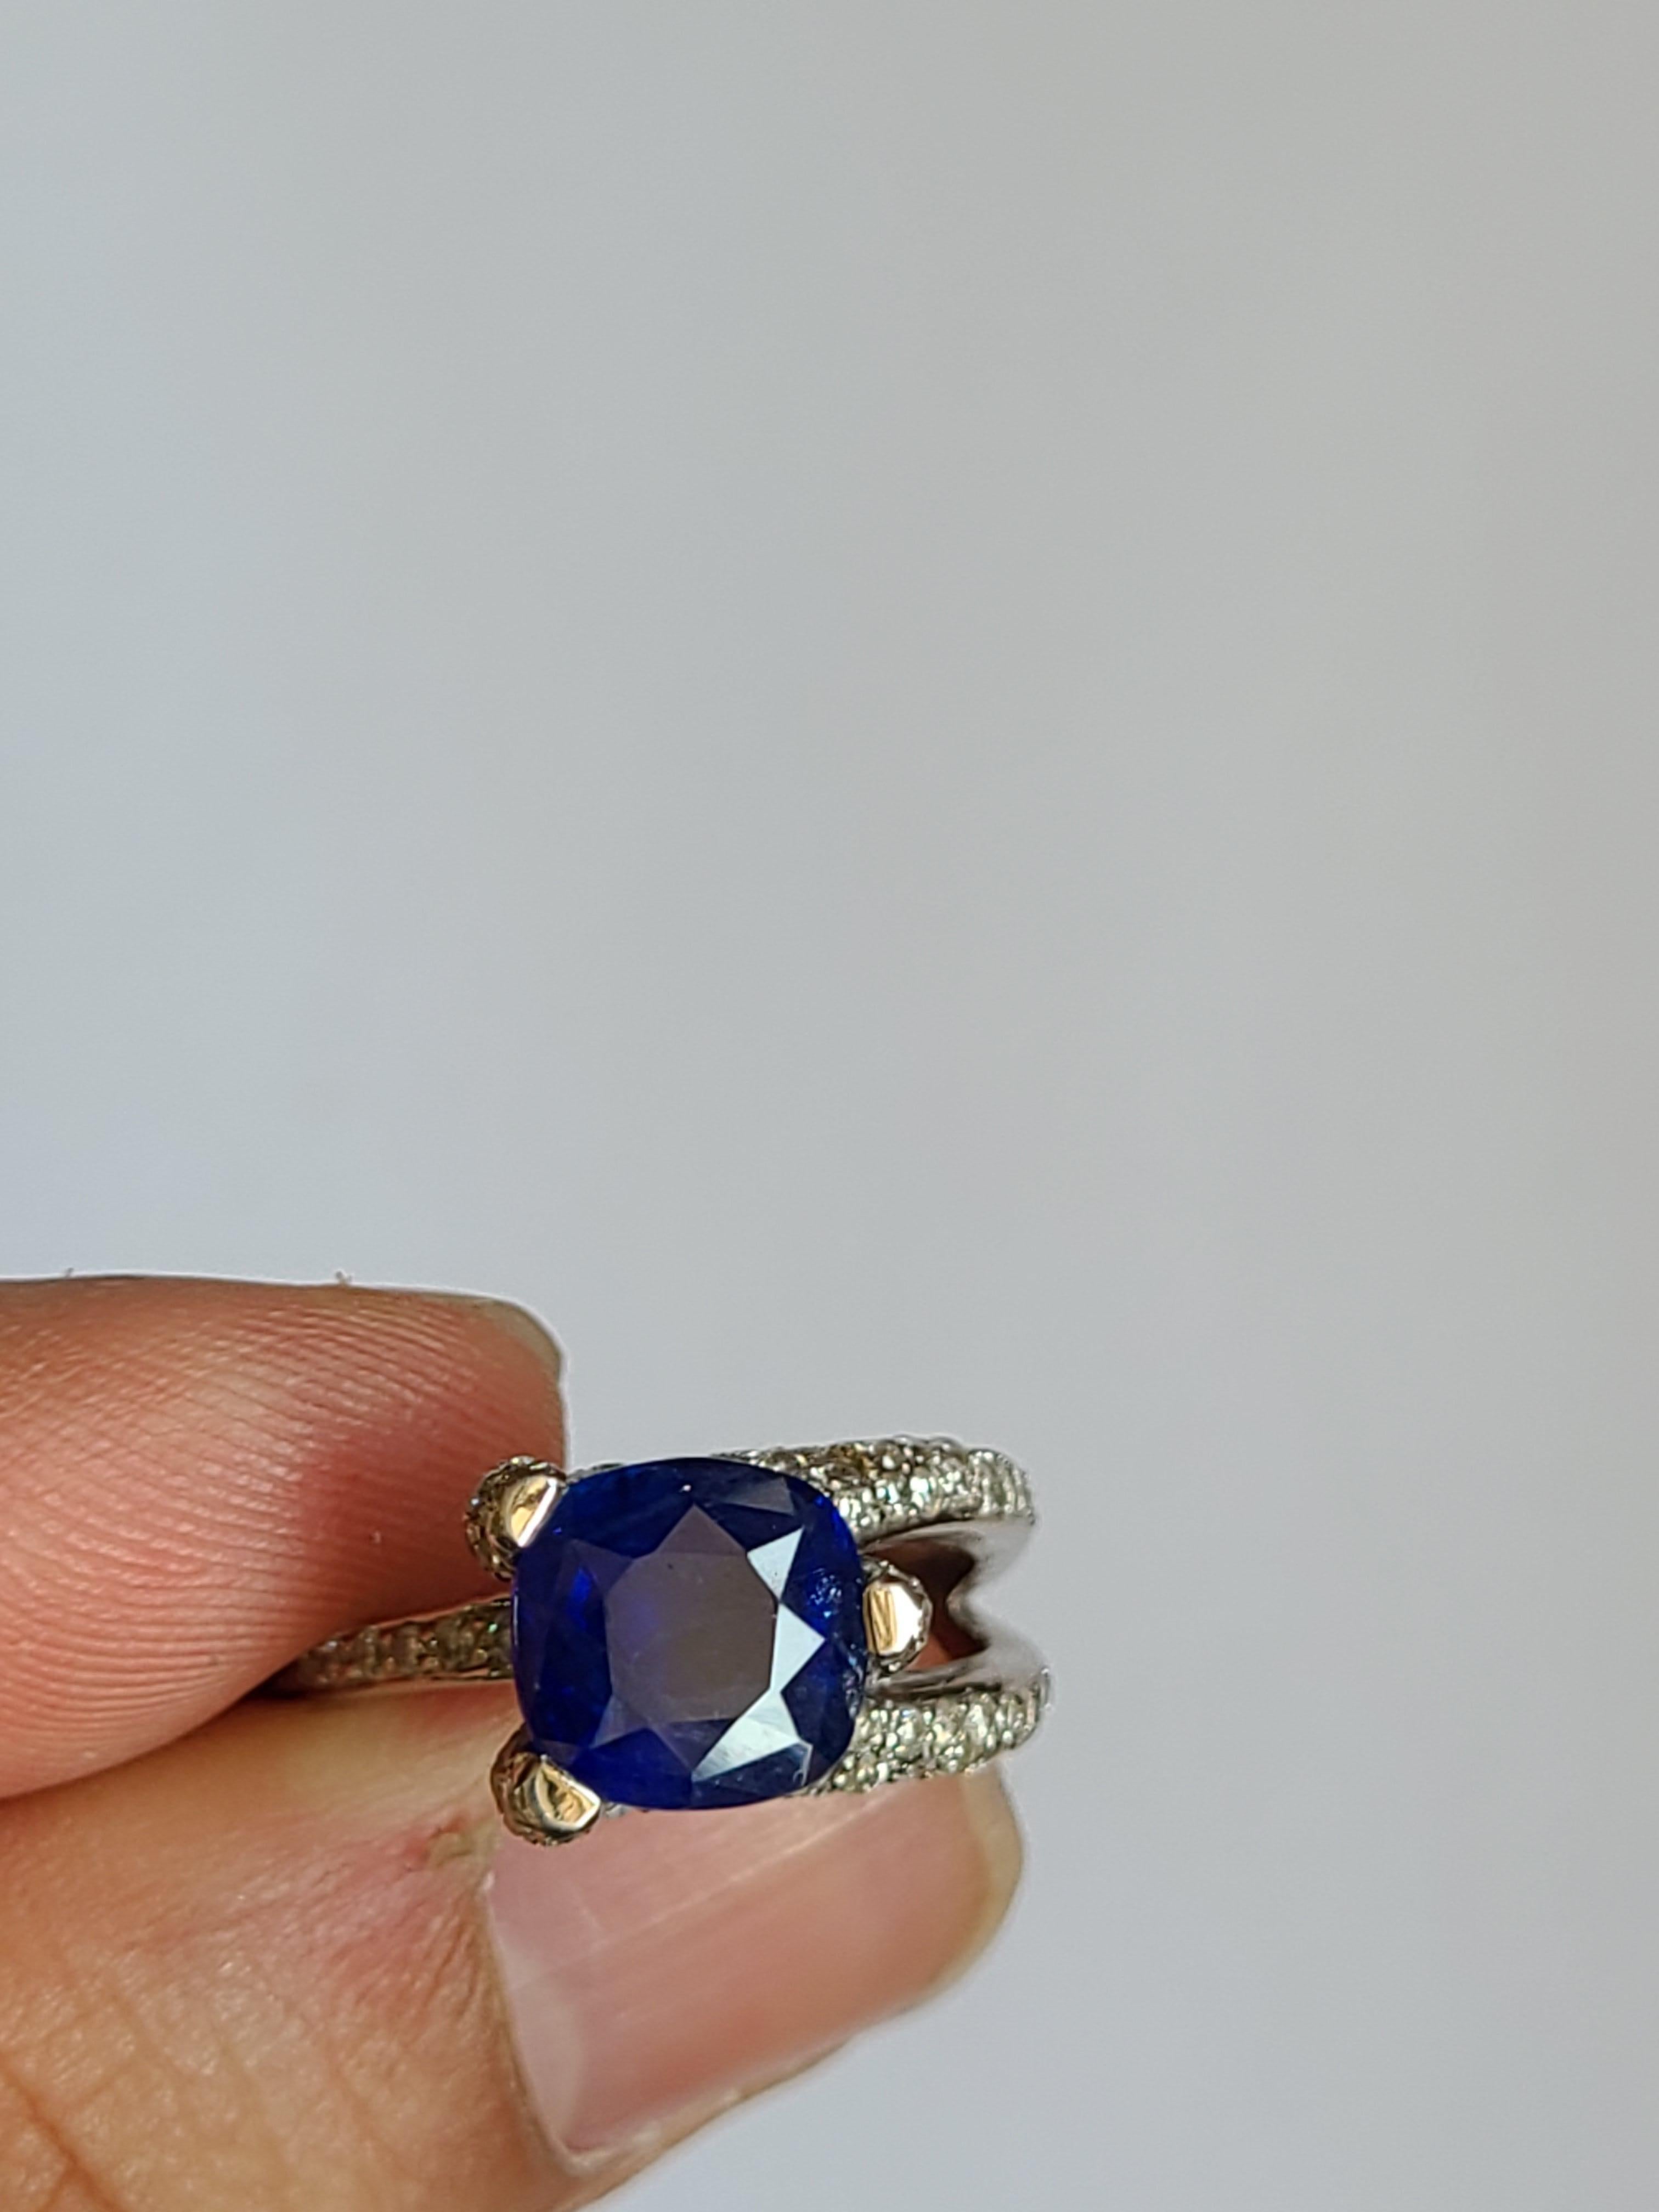 A modern and chic blue sapphire ring set in 18k gold with diamonds. The weight of the sapphire is 2.92 carats and diamond weight is .81 carats . The ring dimensions in cm .9 x 2 x 2.6 (L X W X H). US Size 6 1/2.